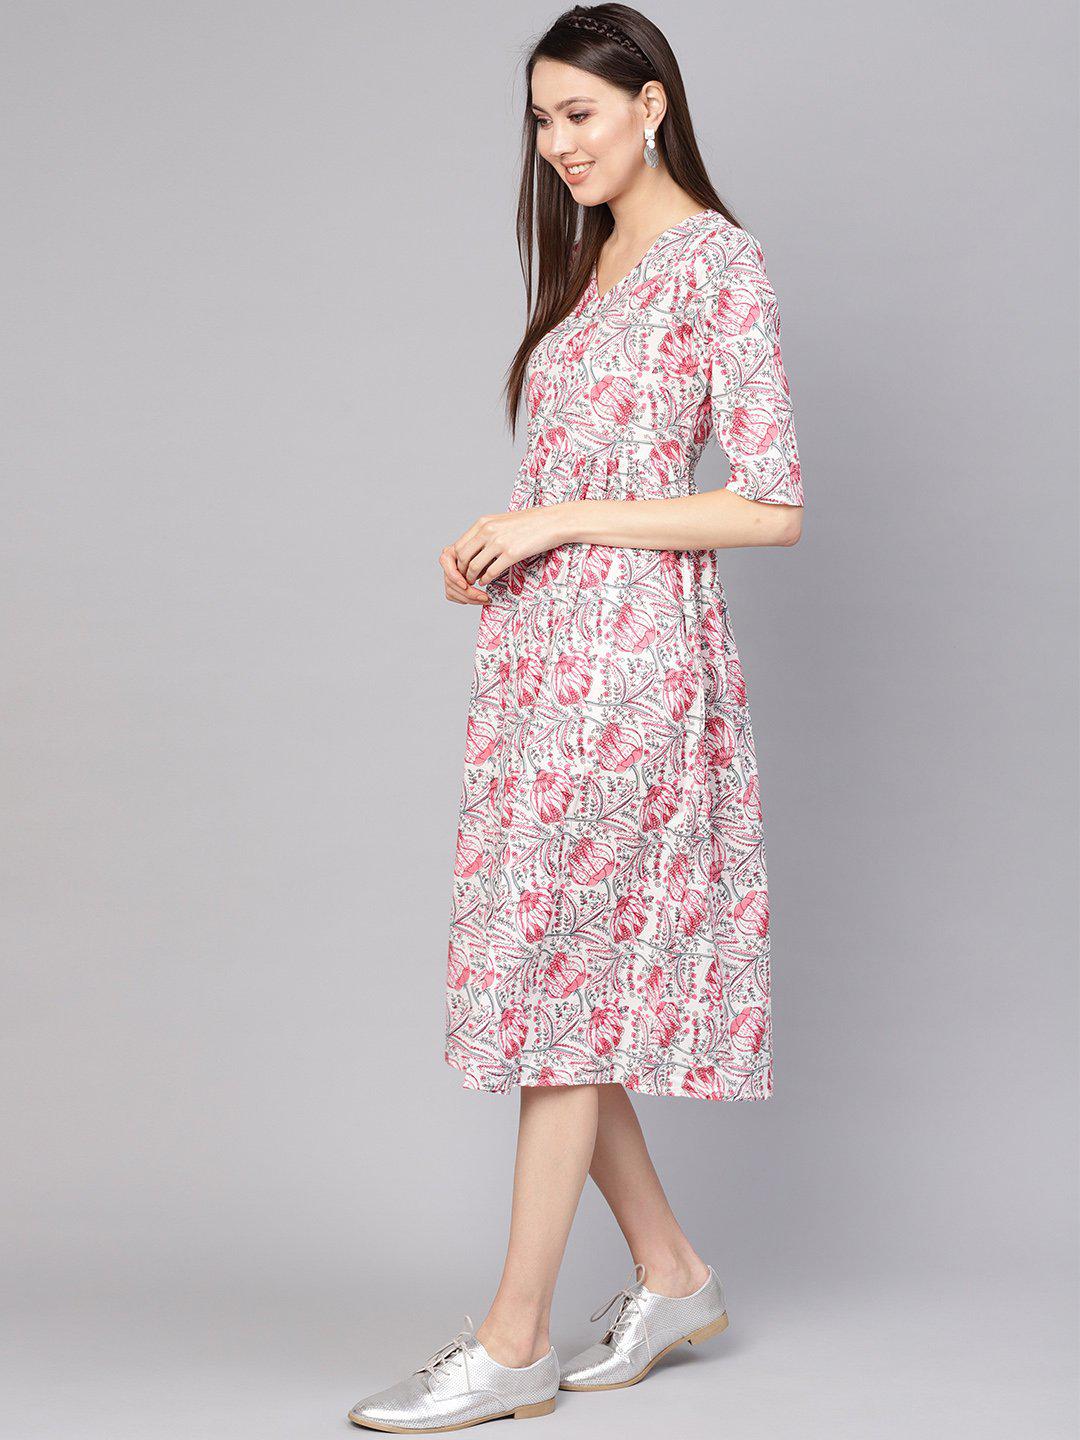 off-white-pink-printed-a-line-dress-10804005WH, Women Clothing, Cotton Dress